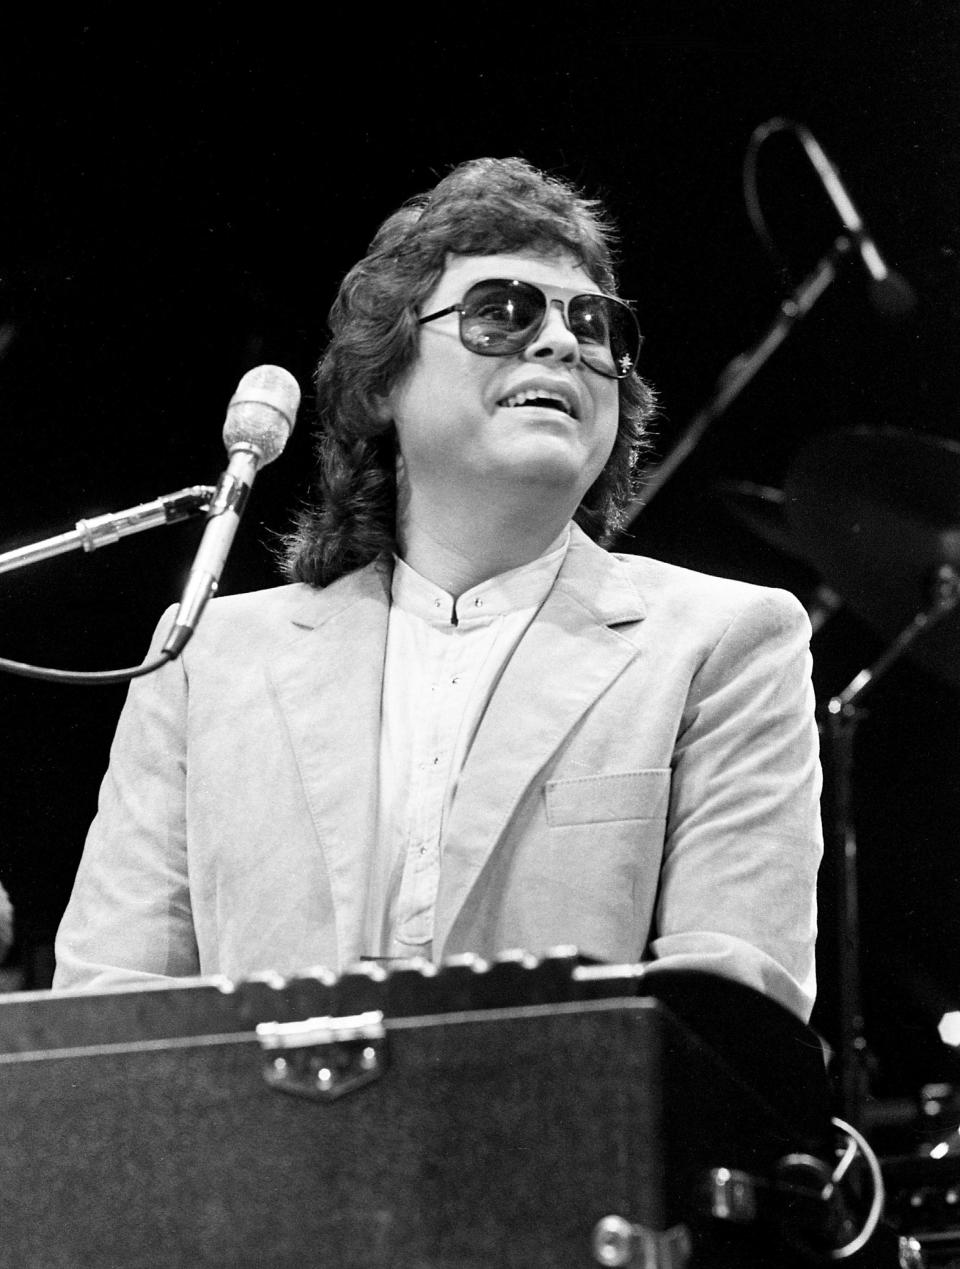 Country-pop entertainer Ronnie Milsap nearly stole the show during the Volunteer Jam X at Municipal Auditorium Feb. 4, 1984. One of his biggest hits is "Smoky Mountain Rain."